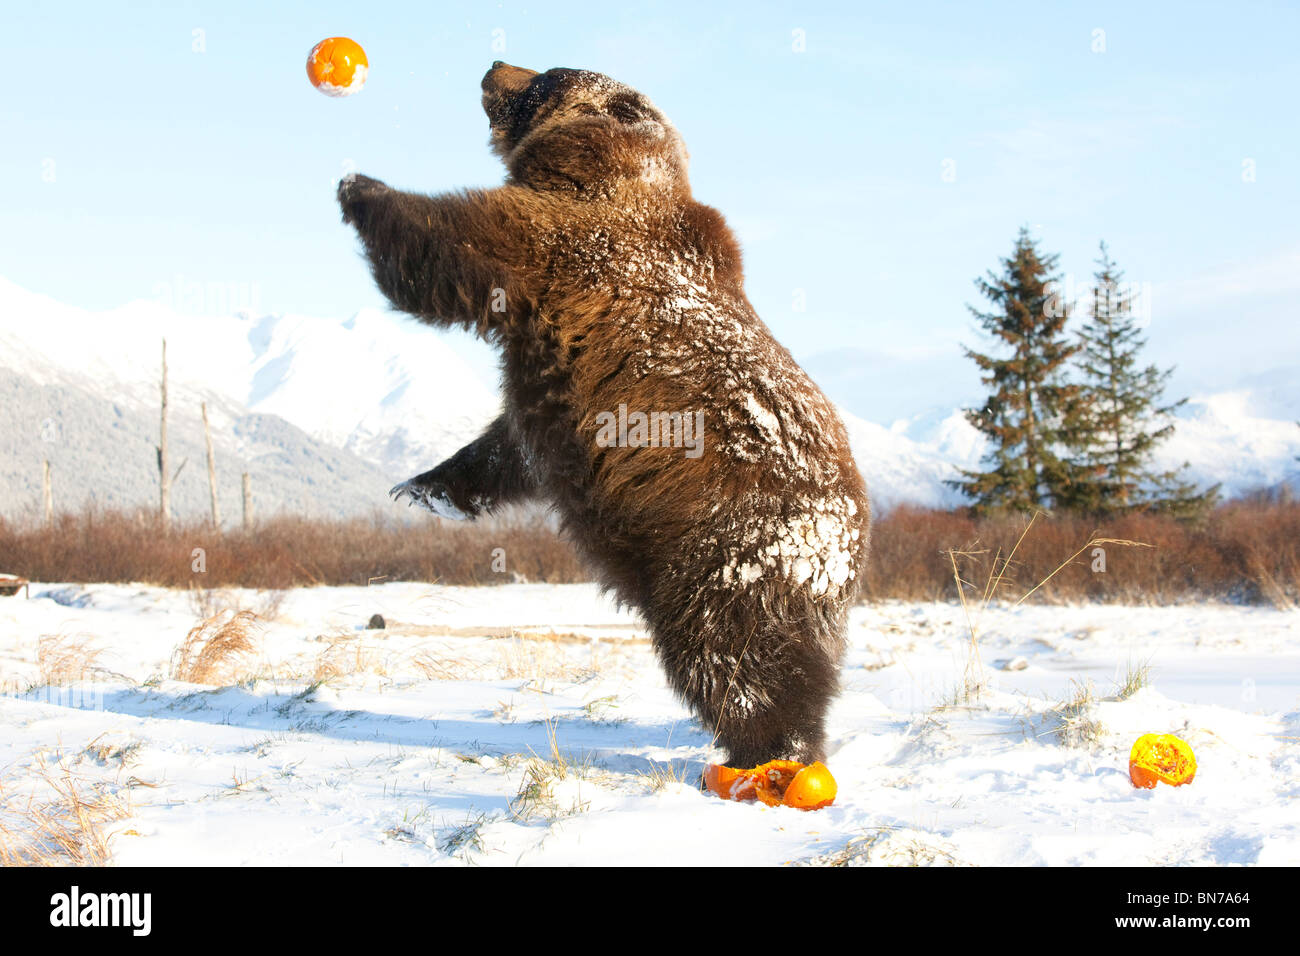 CAPTIVE Grizzly plays with pumpkins by throwing them in the air at the Alaska Wildlife Conservation Center, Alaska Stock Photo